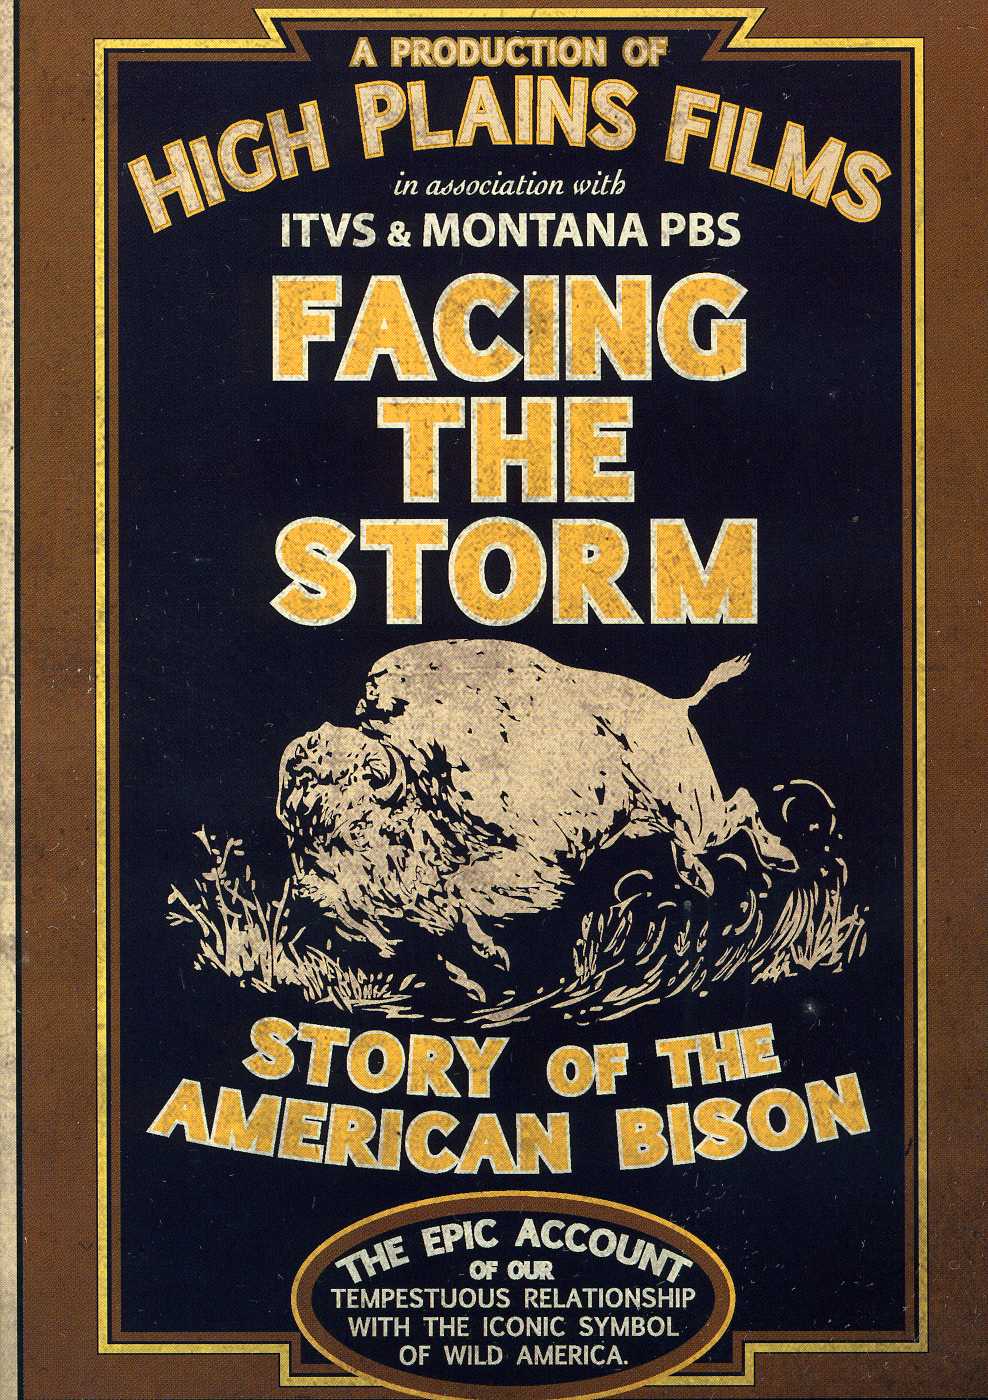 FACING THE STORM: STORY OF THE AMERICAN BISON